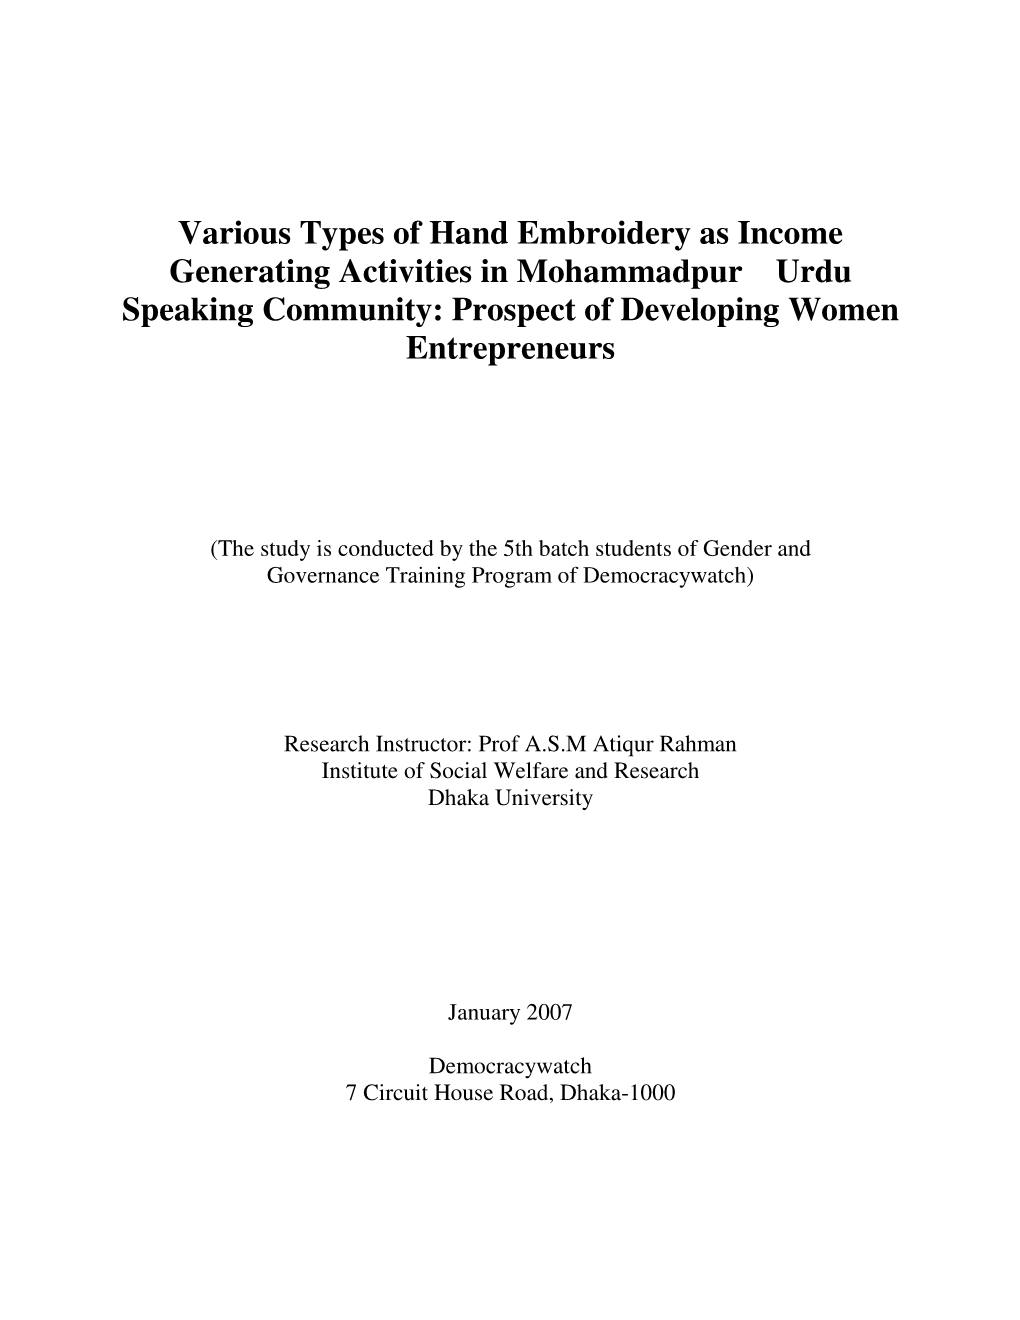 Various Types of Hand Embroidery As Income Generating Activities in Mohammadpur Urdu Speaking Community: Prospect of Developing Women Entrepreneurs